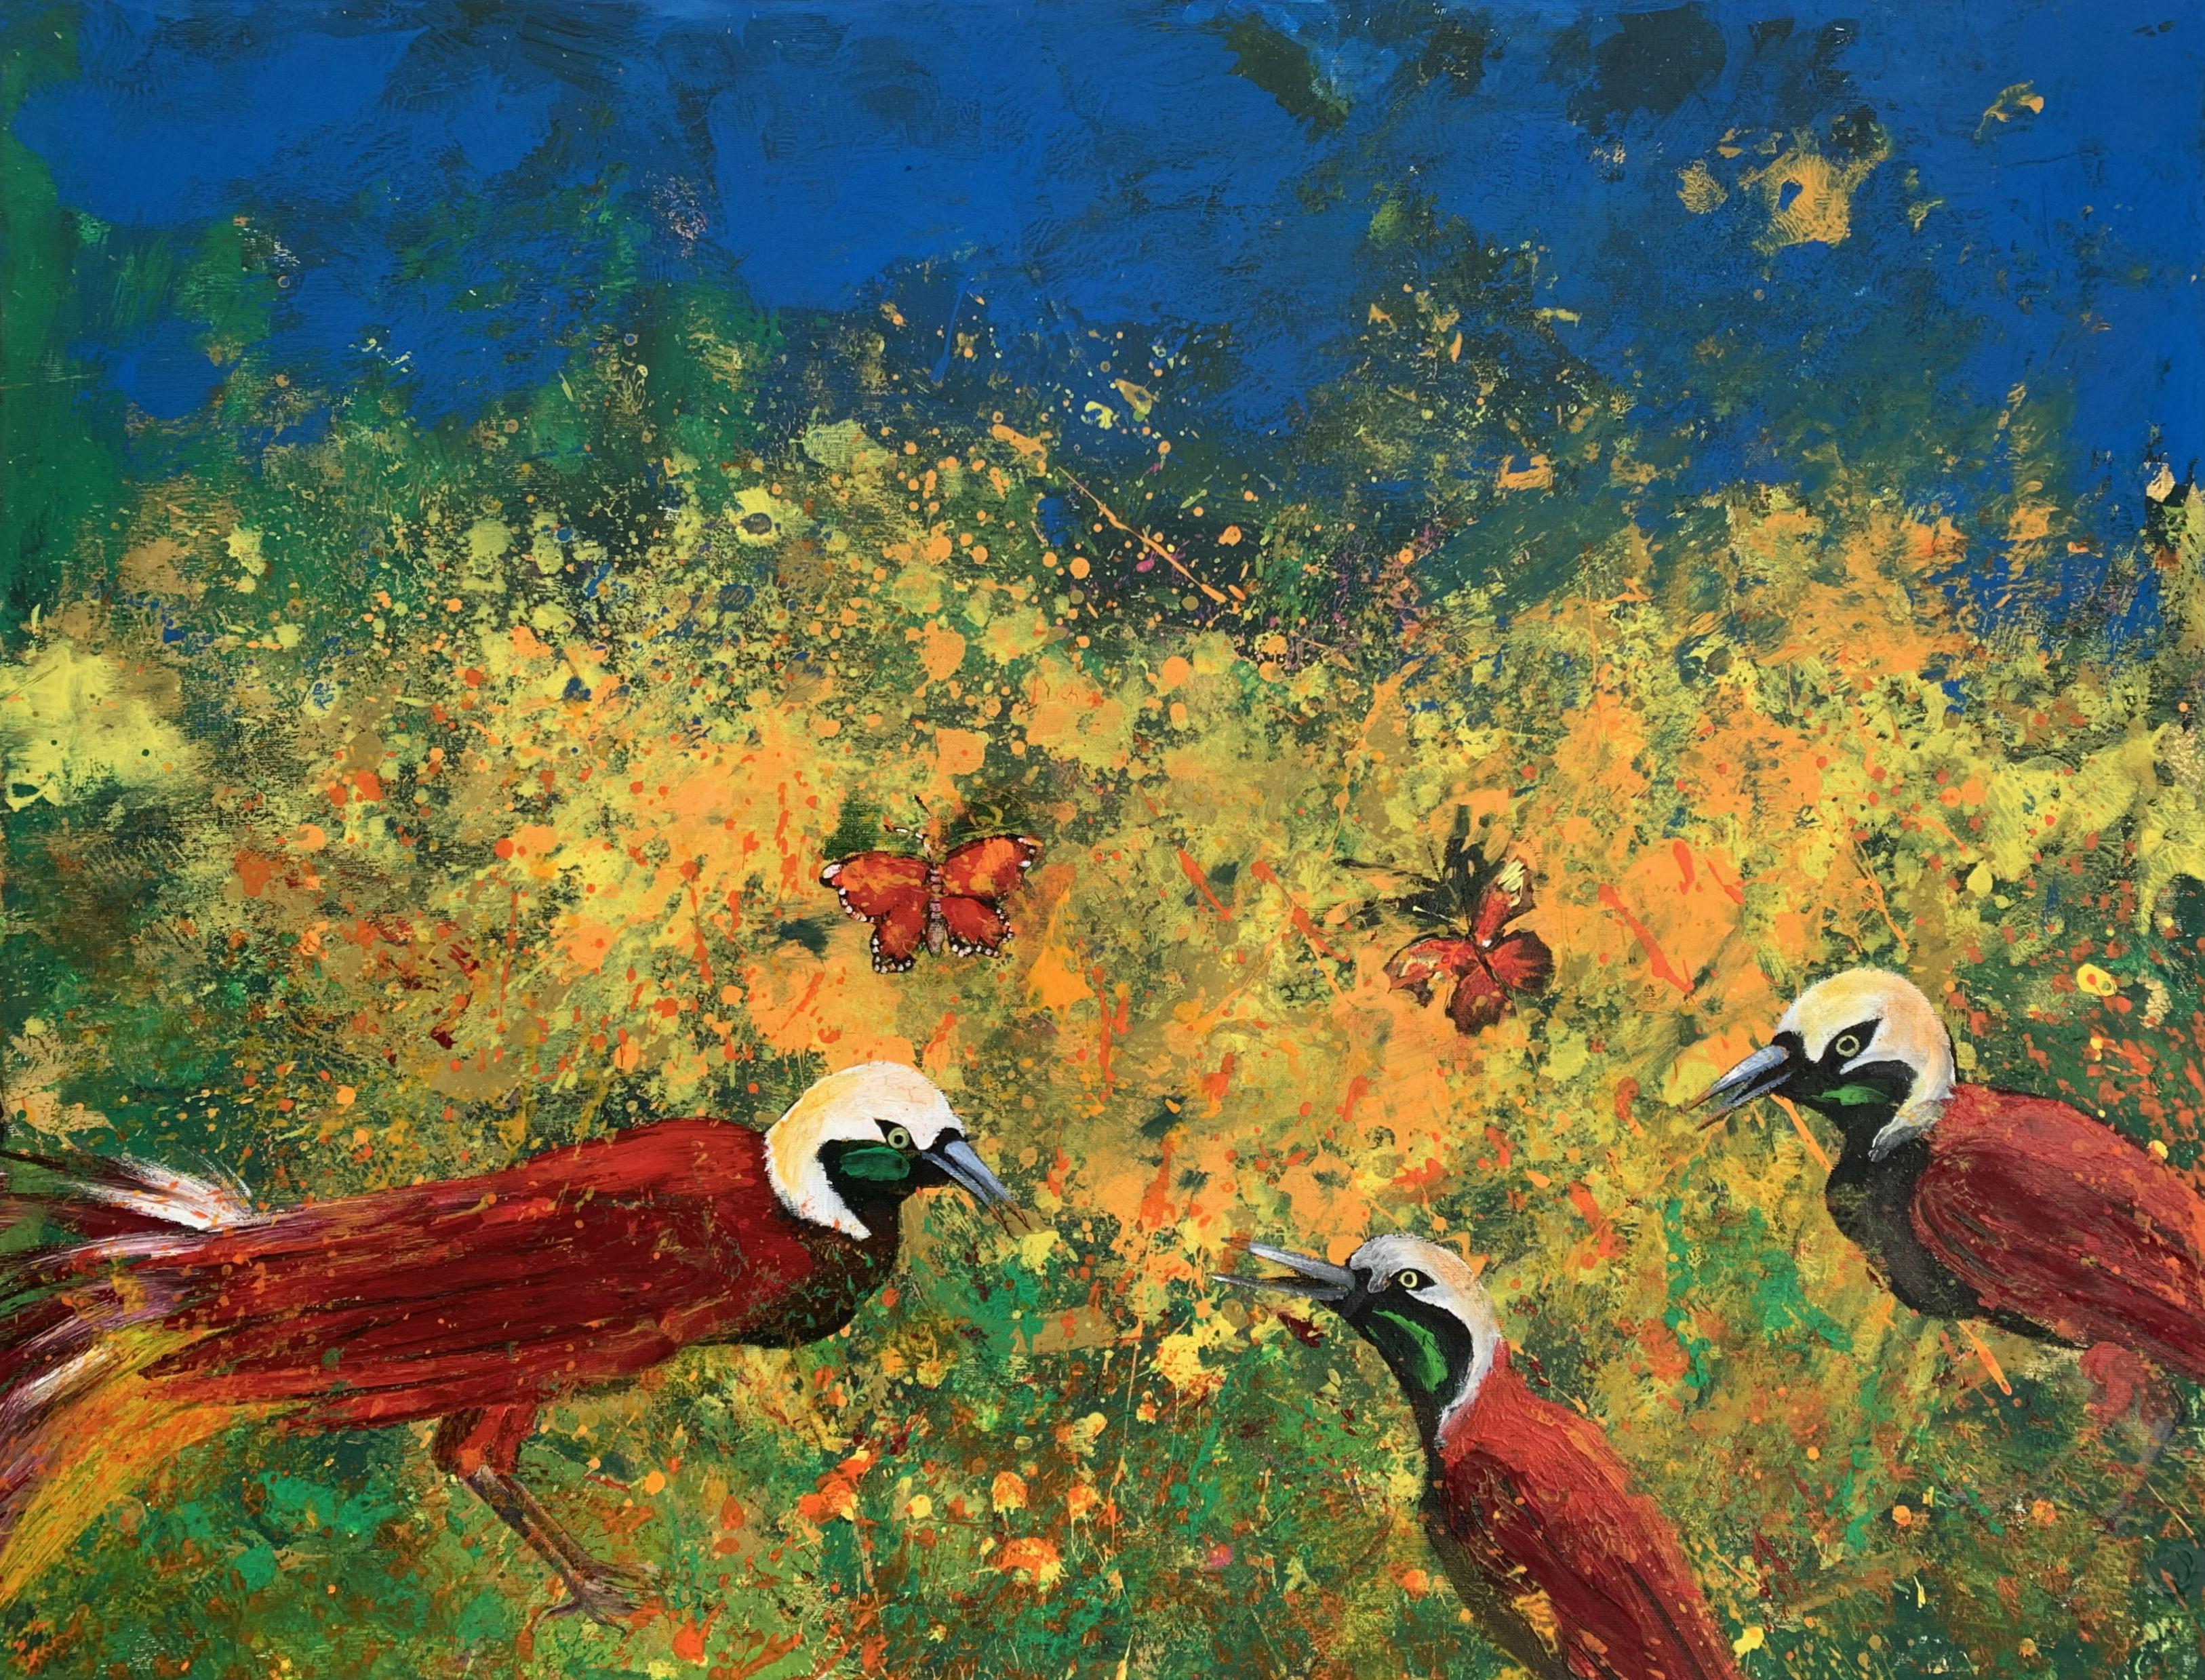 Magdalena Nałęcz Figurative Painting - Gardens of Delight LVII - XXI century figurative oil painting, Birds, Colorful